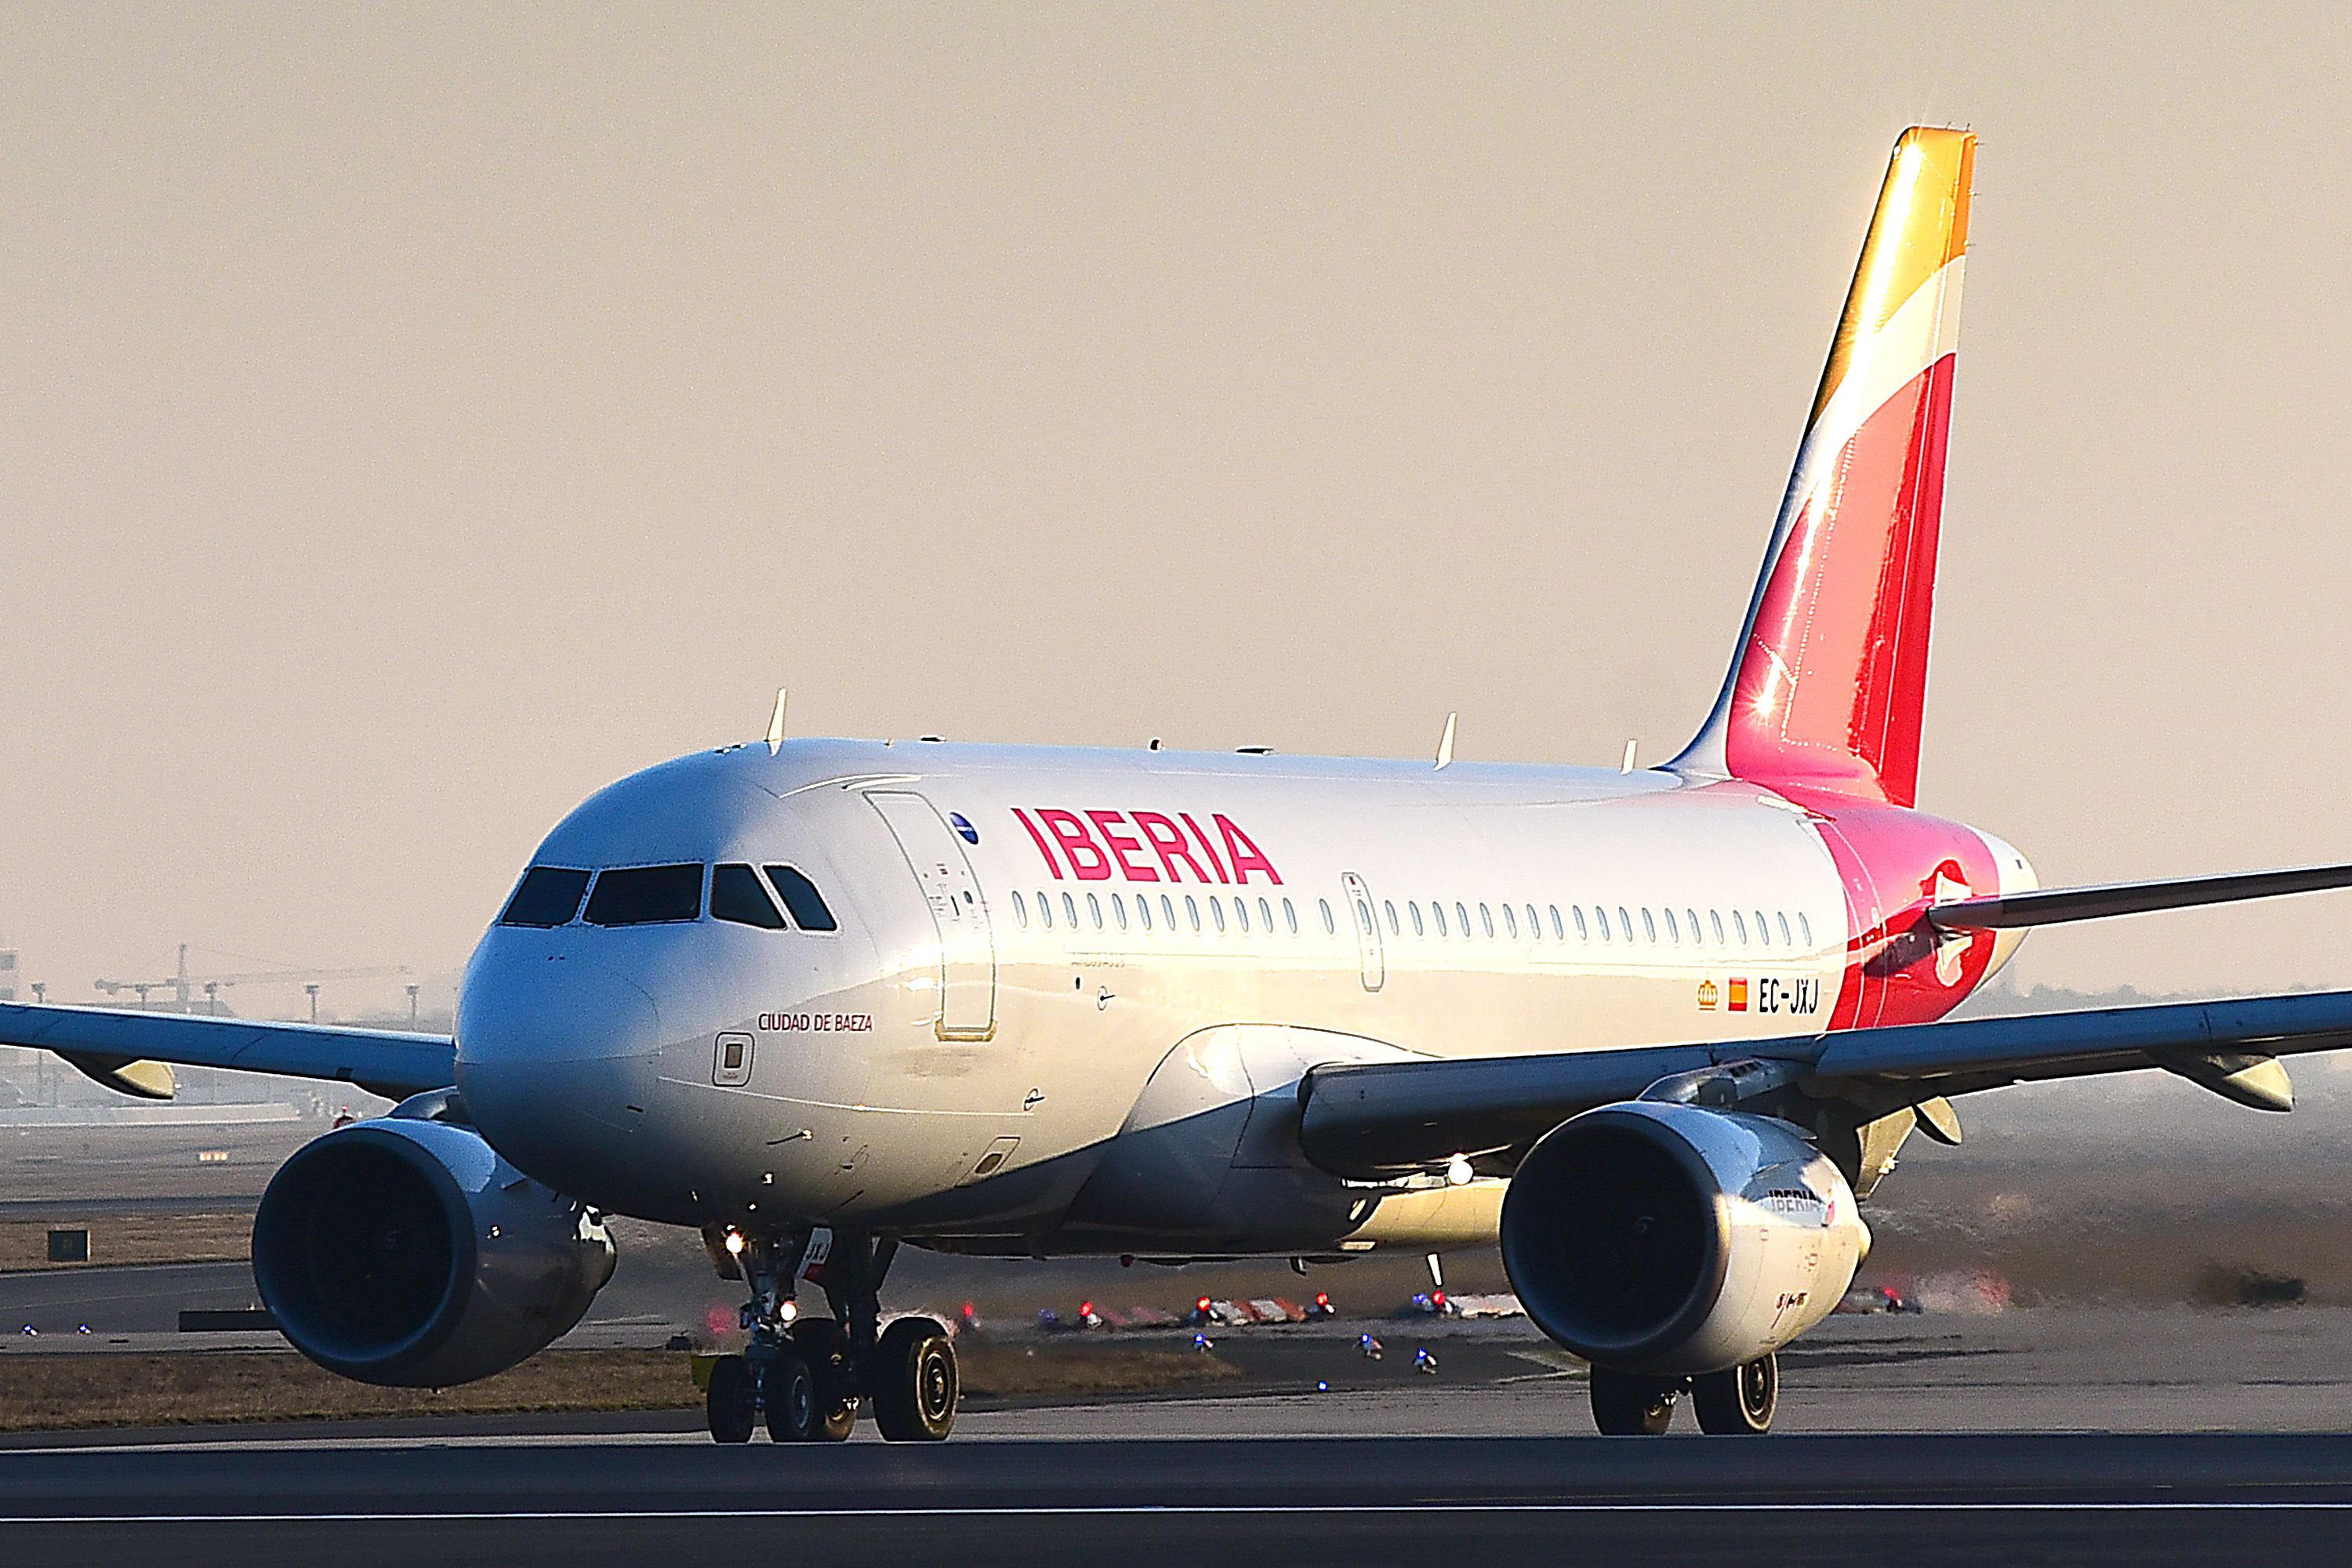 Iberia A319 airbus aircraft on the ground